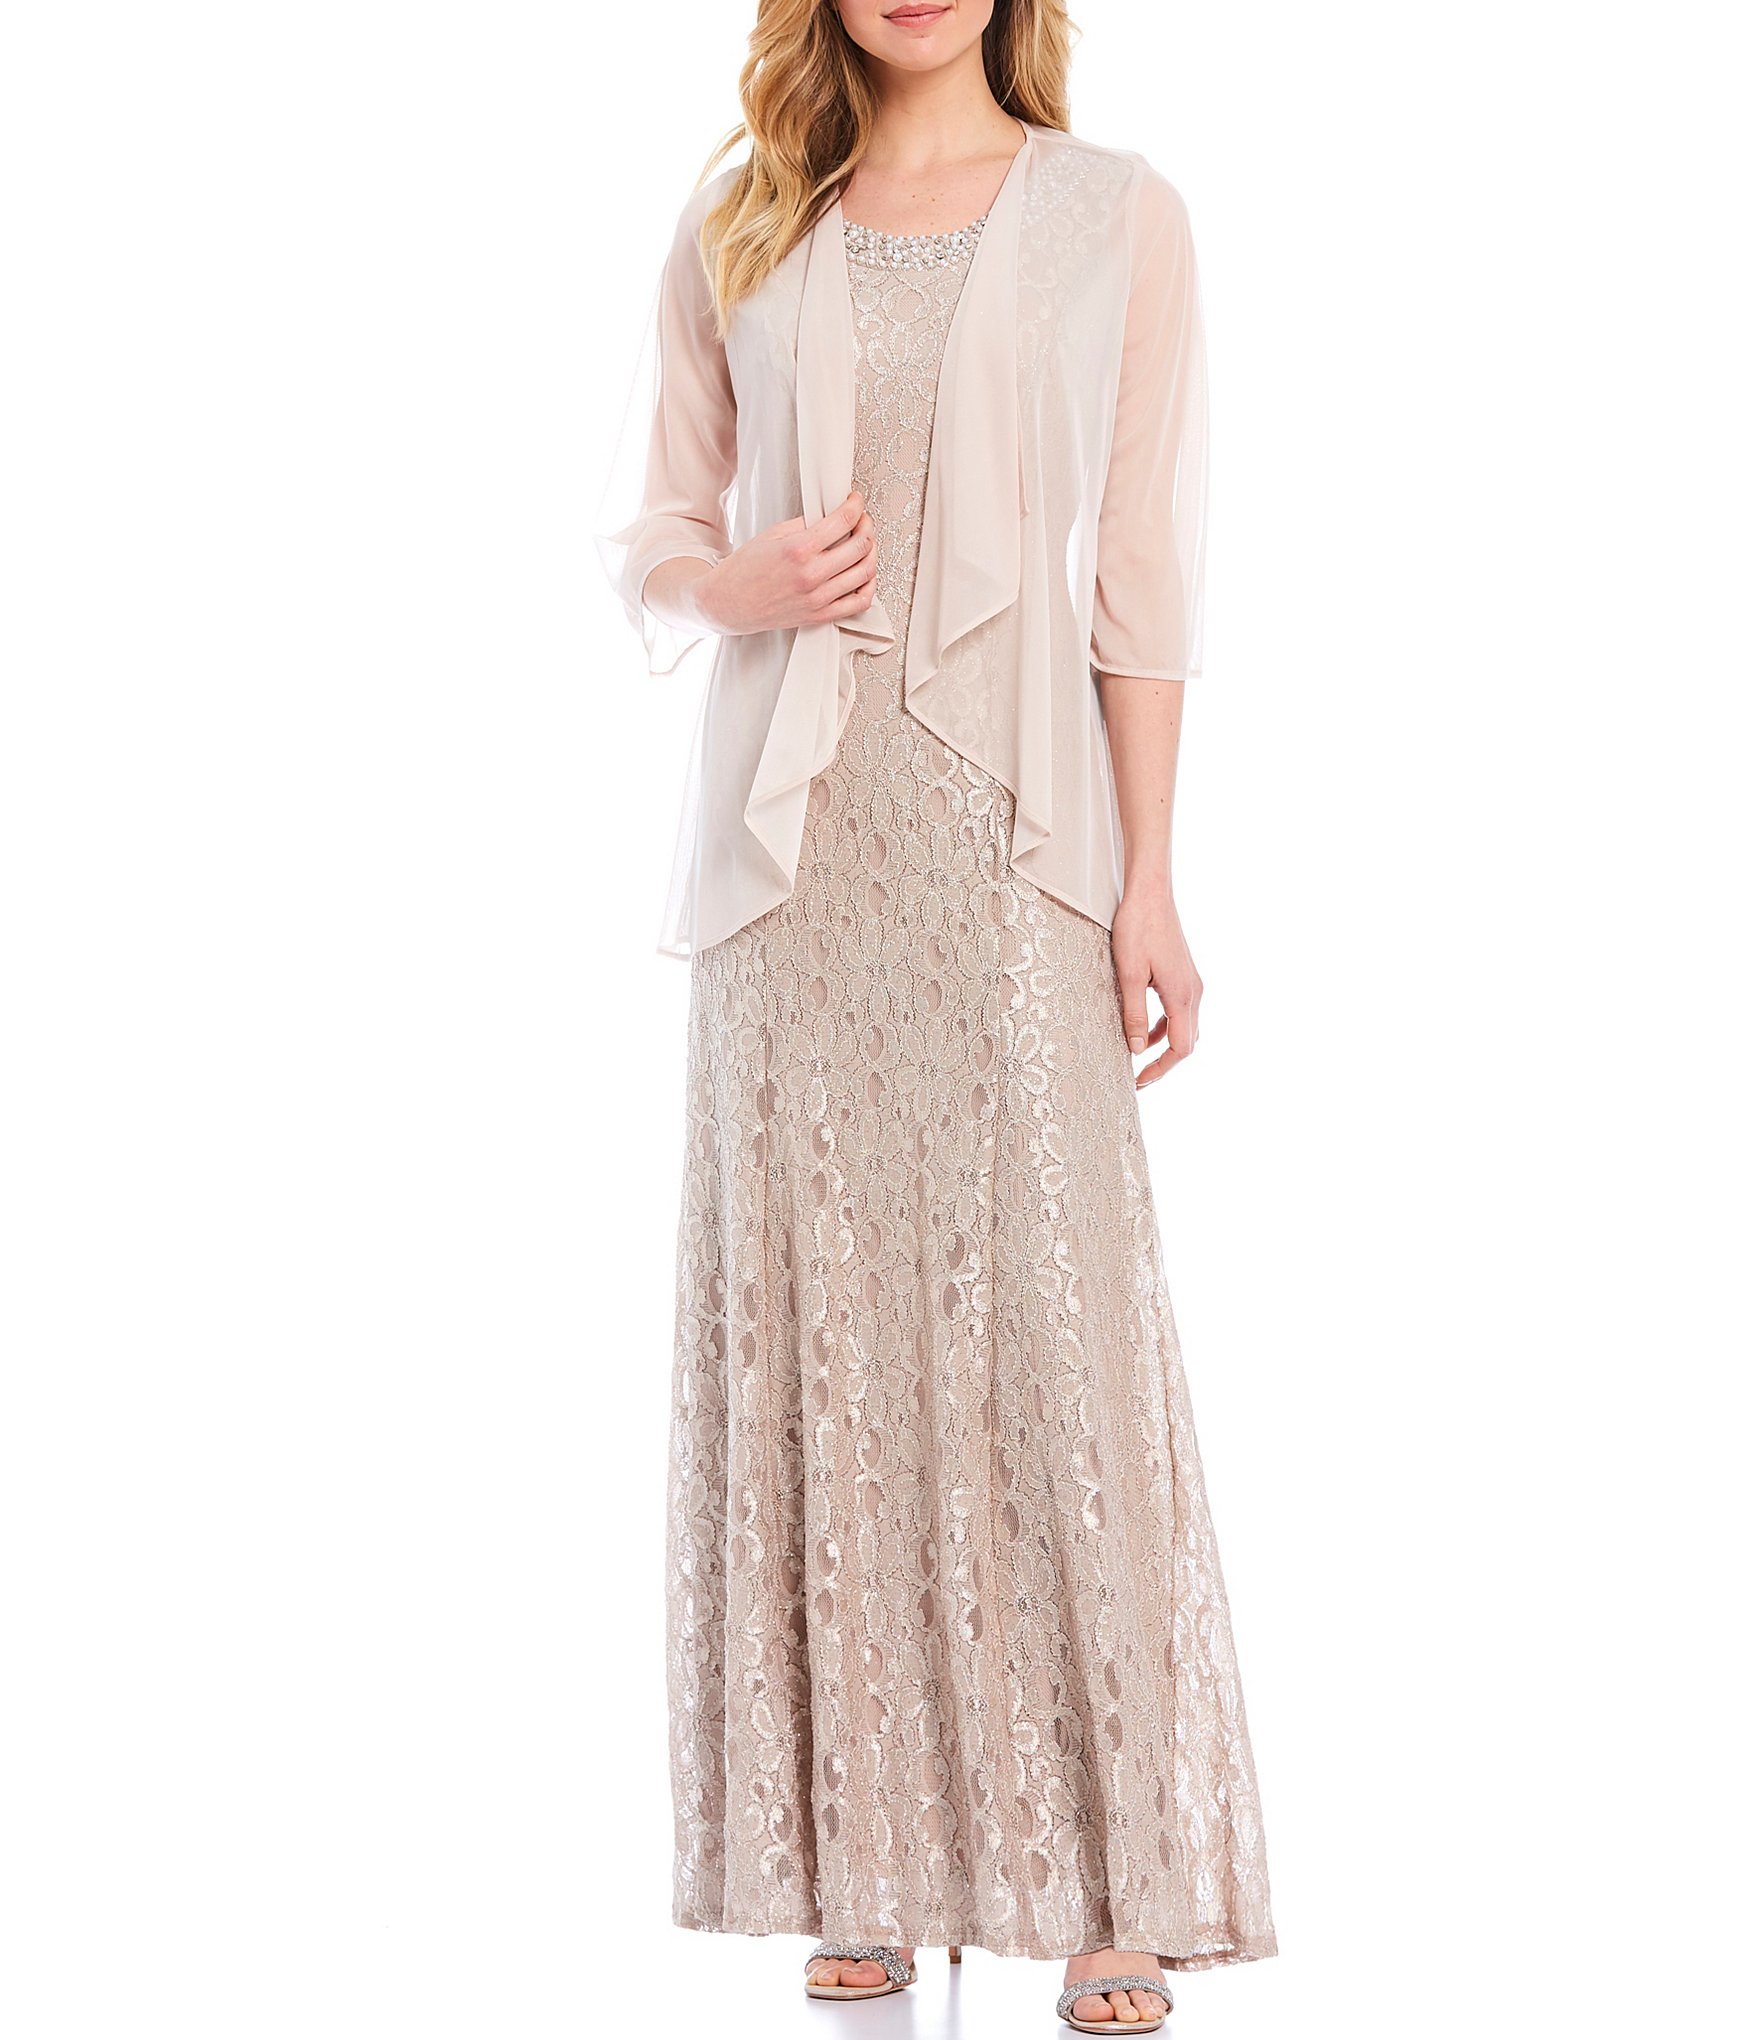 Champagne Lace Motherof The Bride Dresses Elegant V Neck Full Sleeve Gown  For Wedding, Formal Evening, God Mom Celebrity Wear From Verycute, $62.06